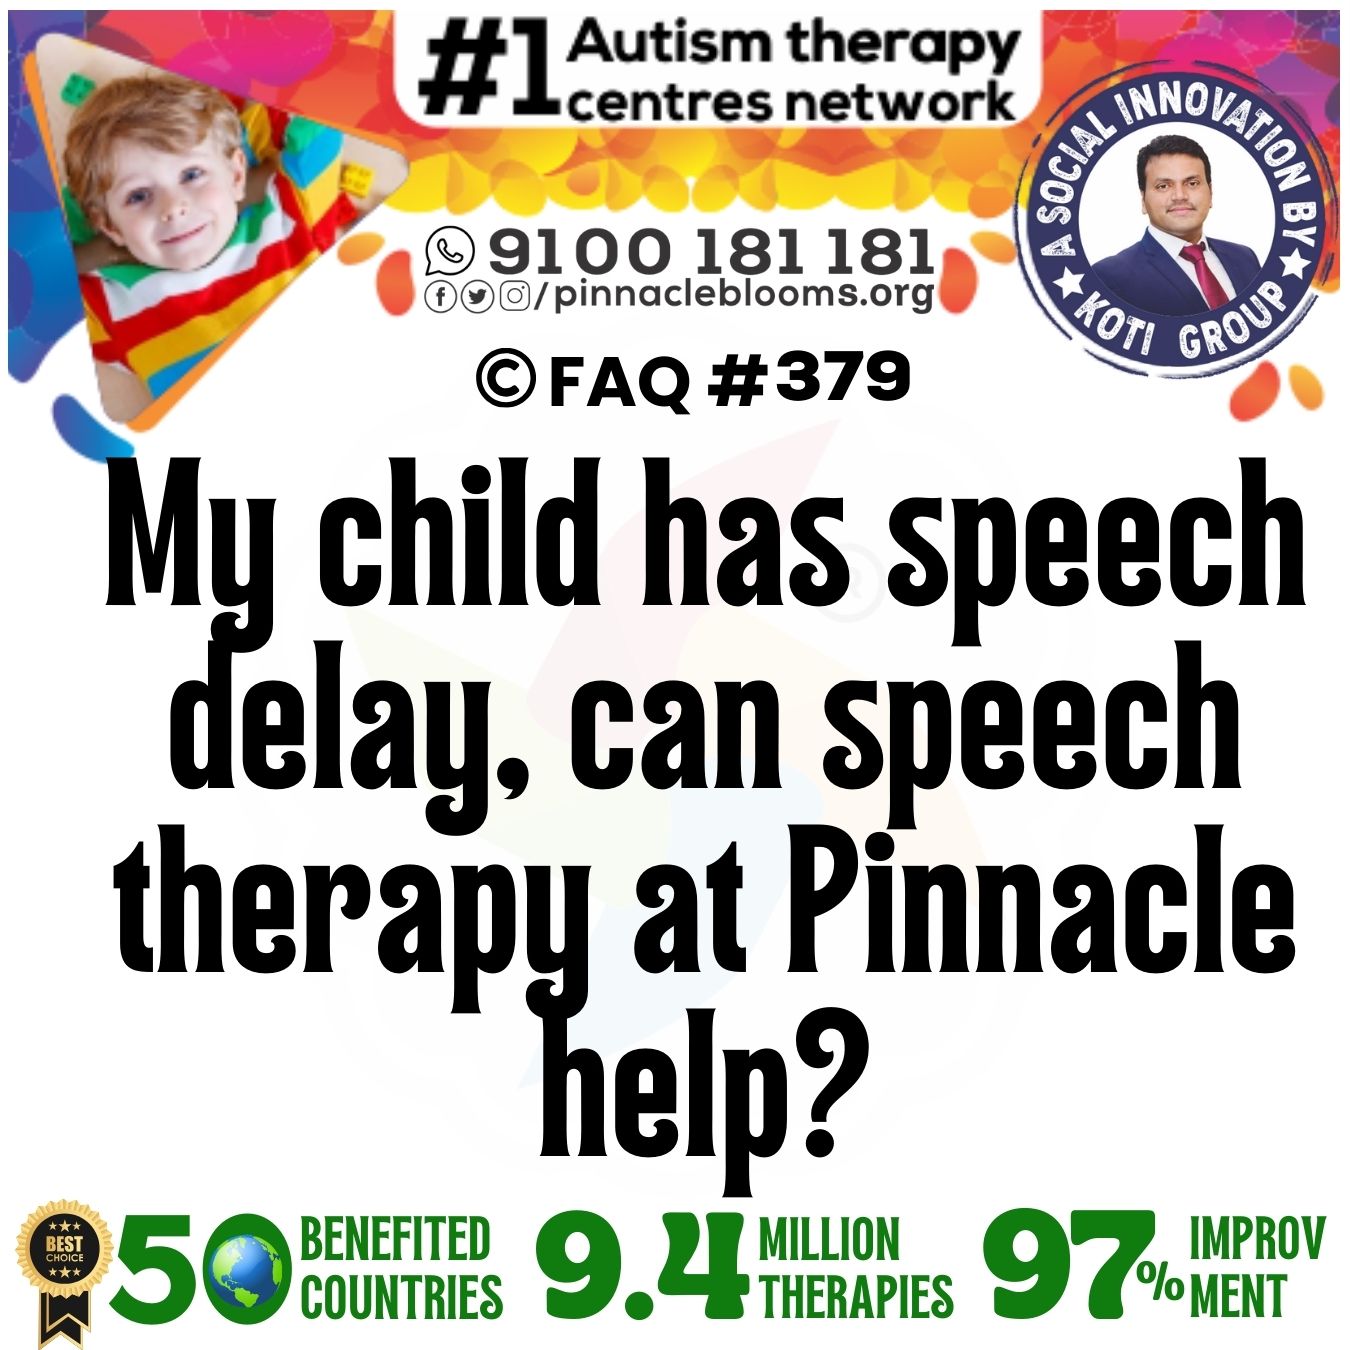 My child has speech delay, can speech therapy at Pinnacle help?